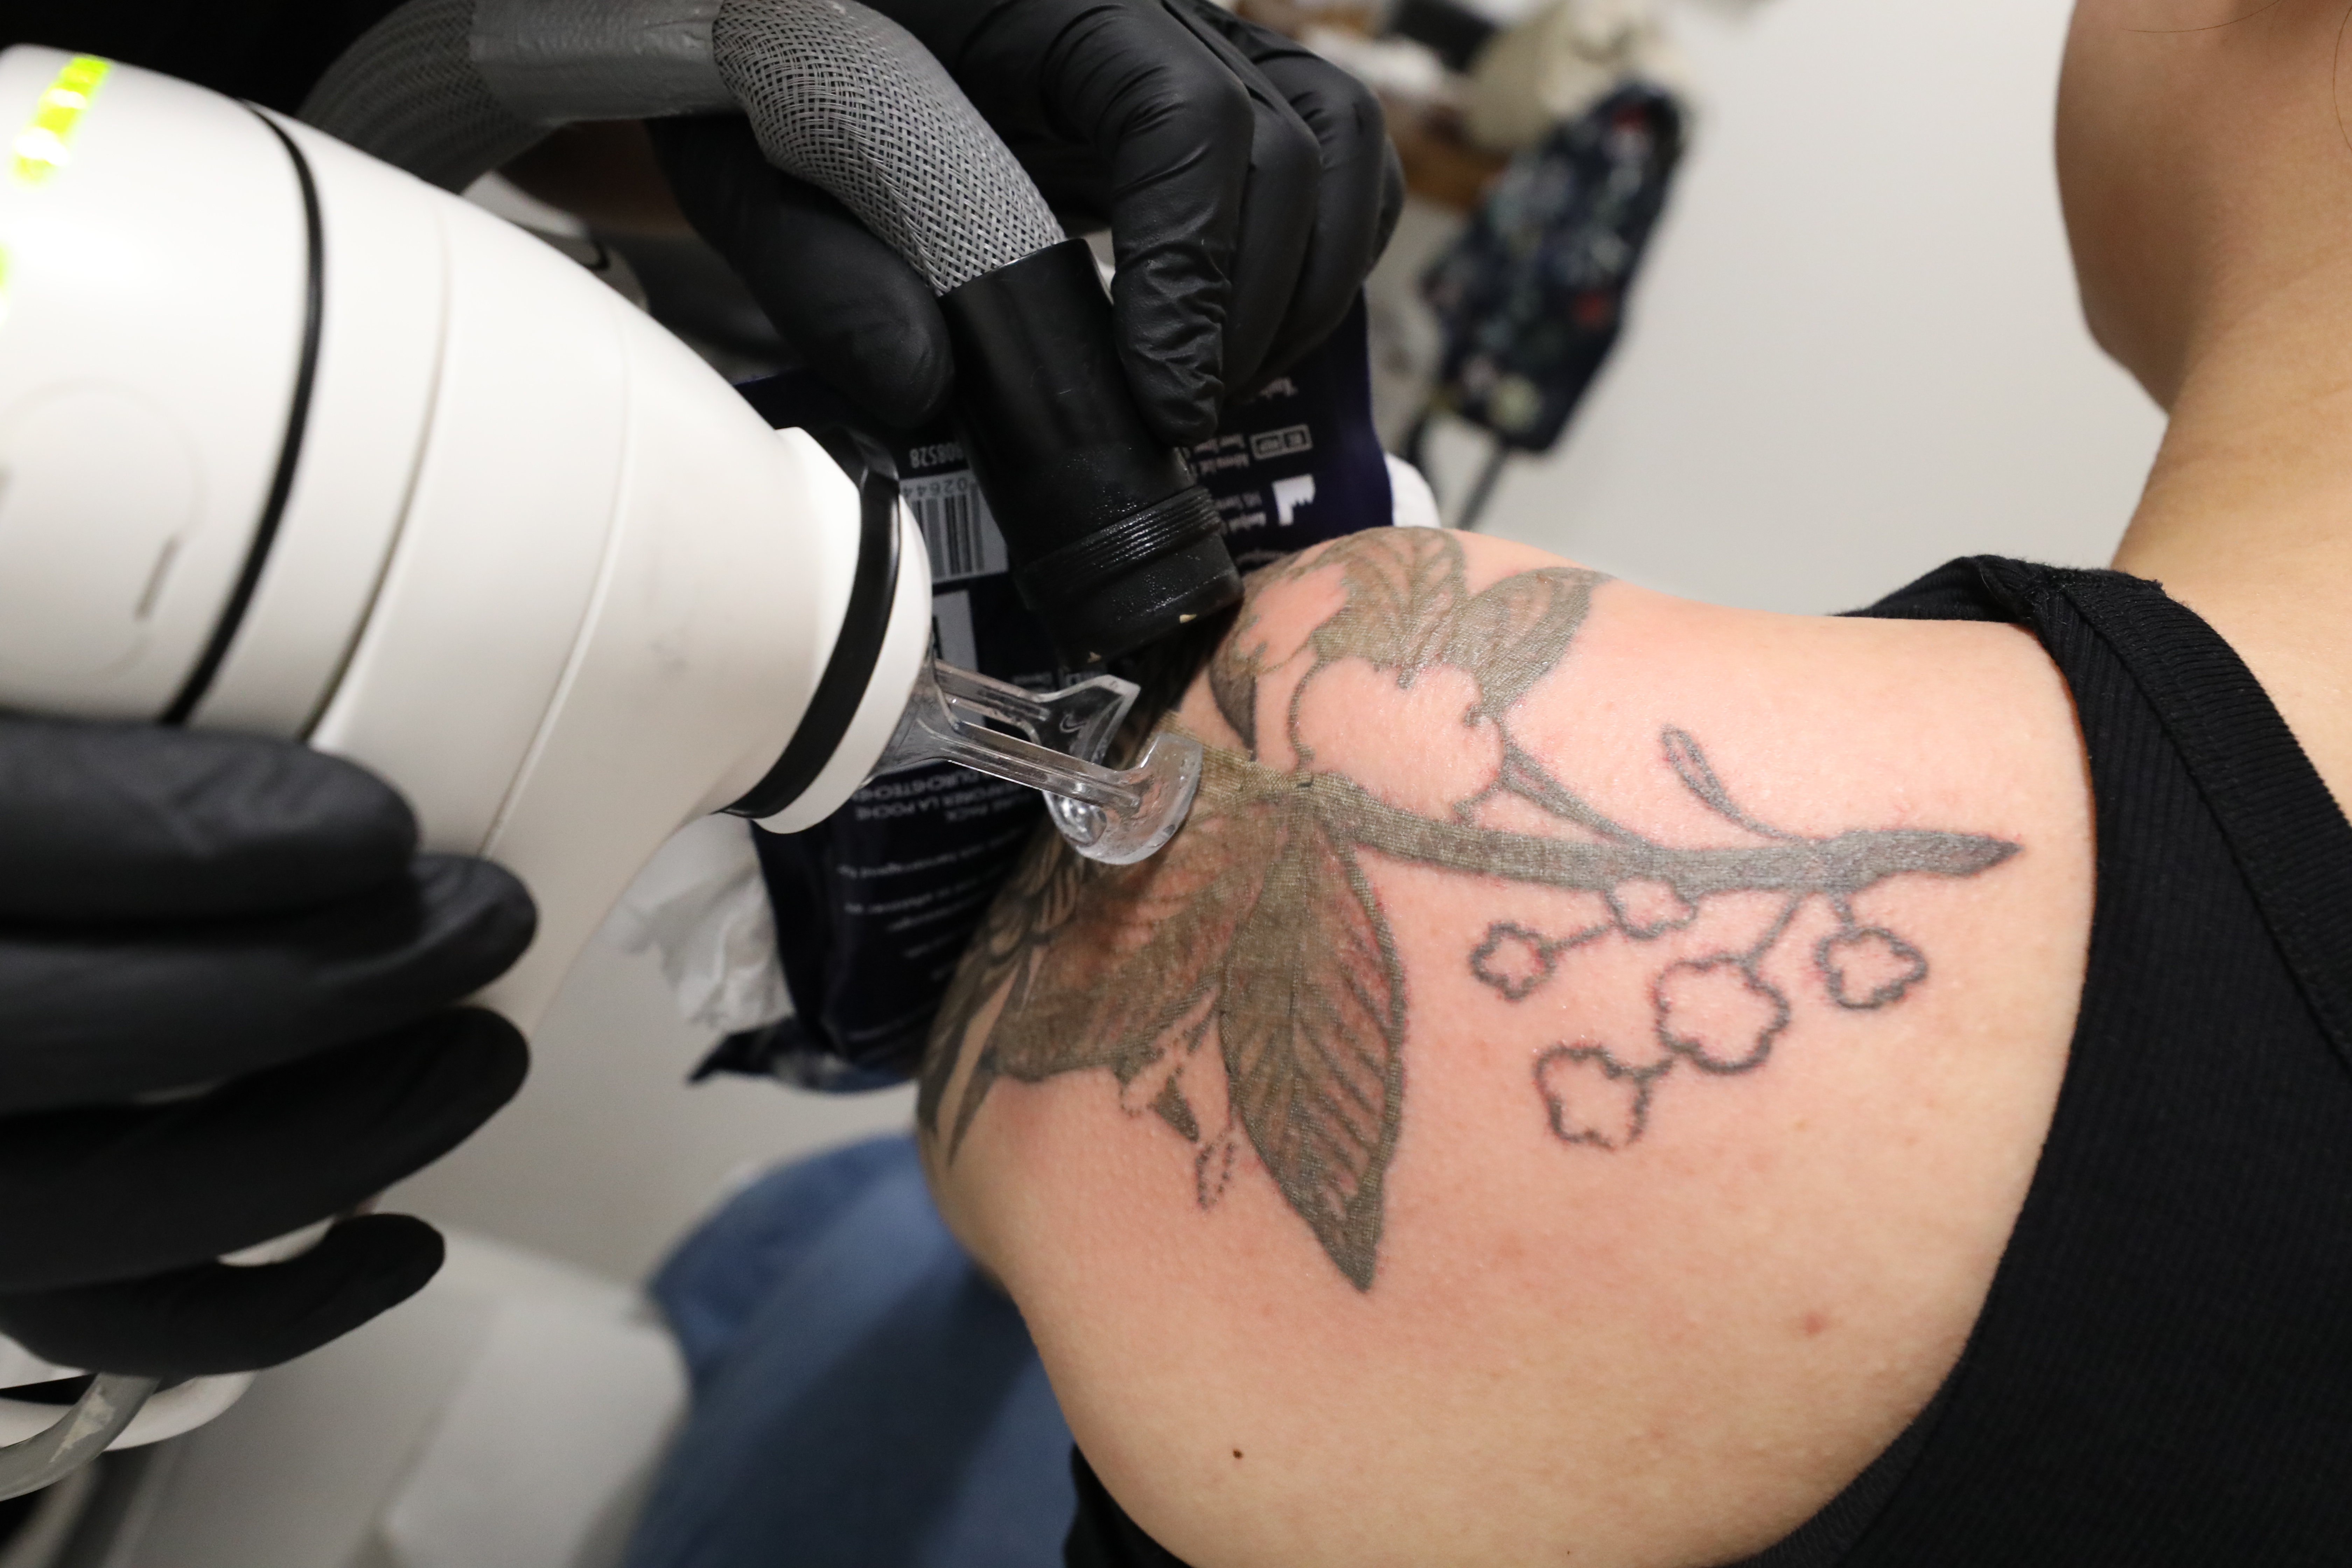 Megumi Removes a Sleeve Tattoo with a Pico Laser.